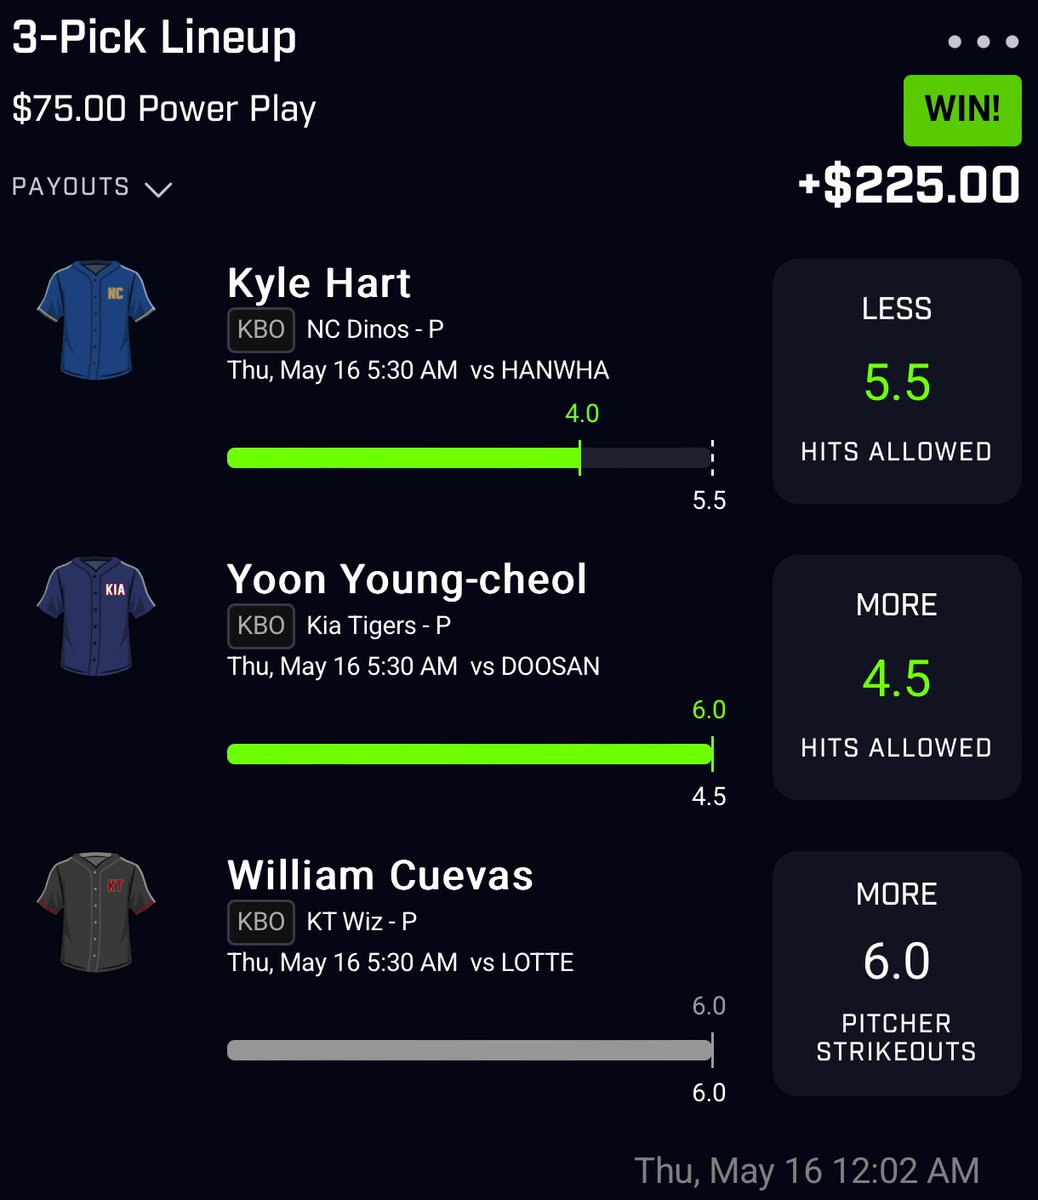 Huge shout out to @PropsDegen for always delivering on some amazing KBO props *I highly recommend giving them a follow* #GamblingX #KBO #PrizePicks #DraftKings  #MLB #betting #MLBTwitter #BettingX #bettingadvice #Underdog